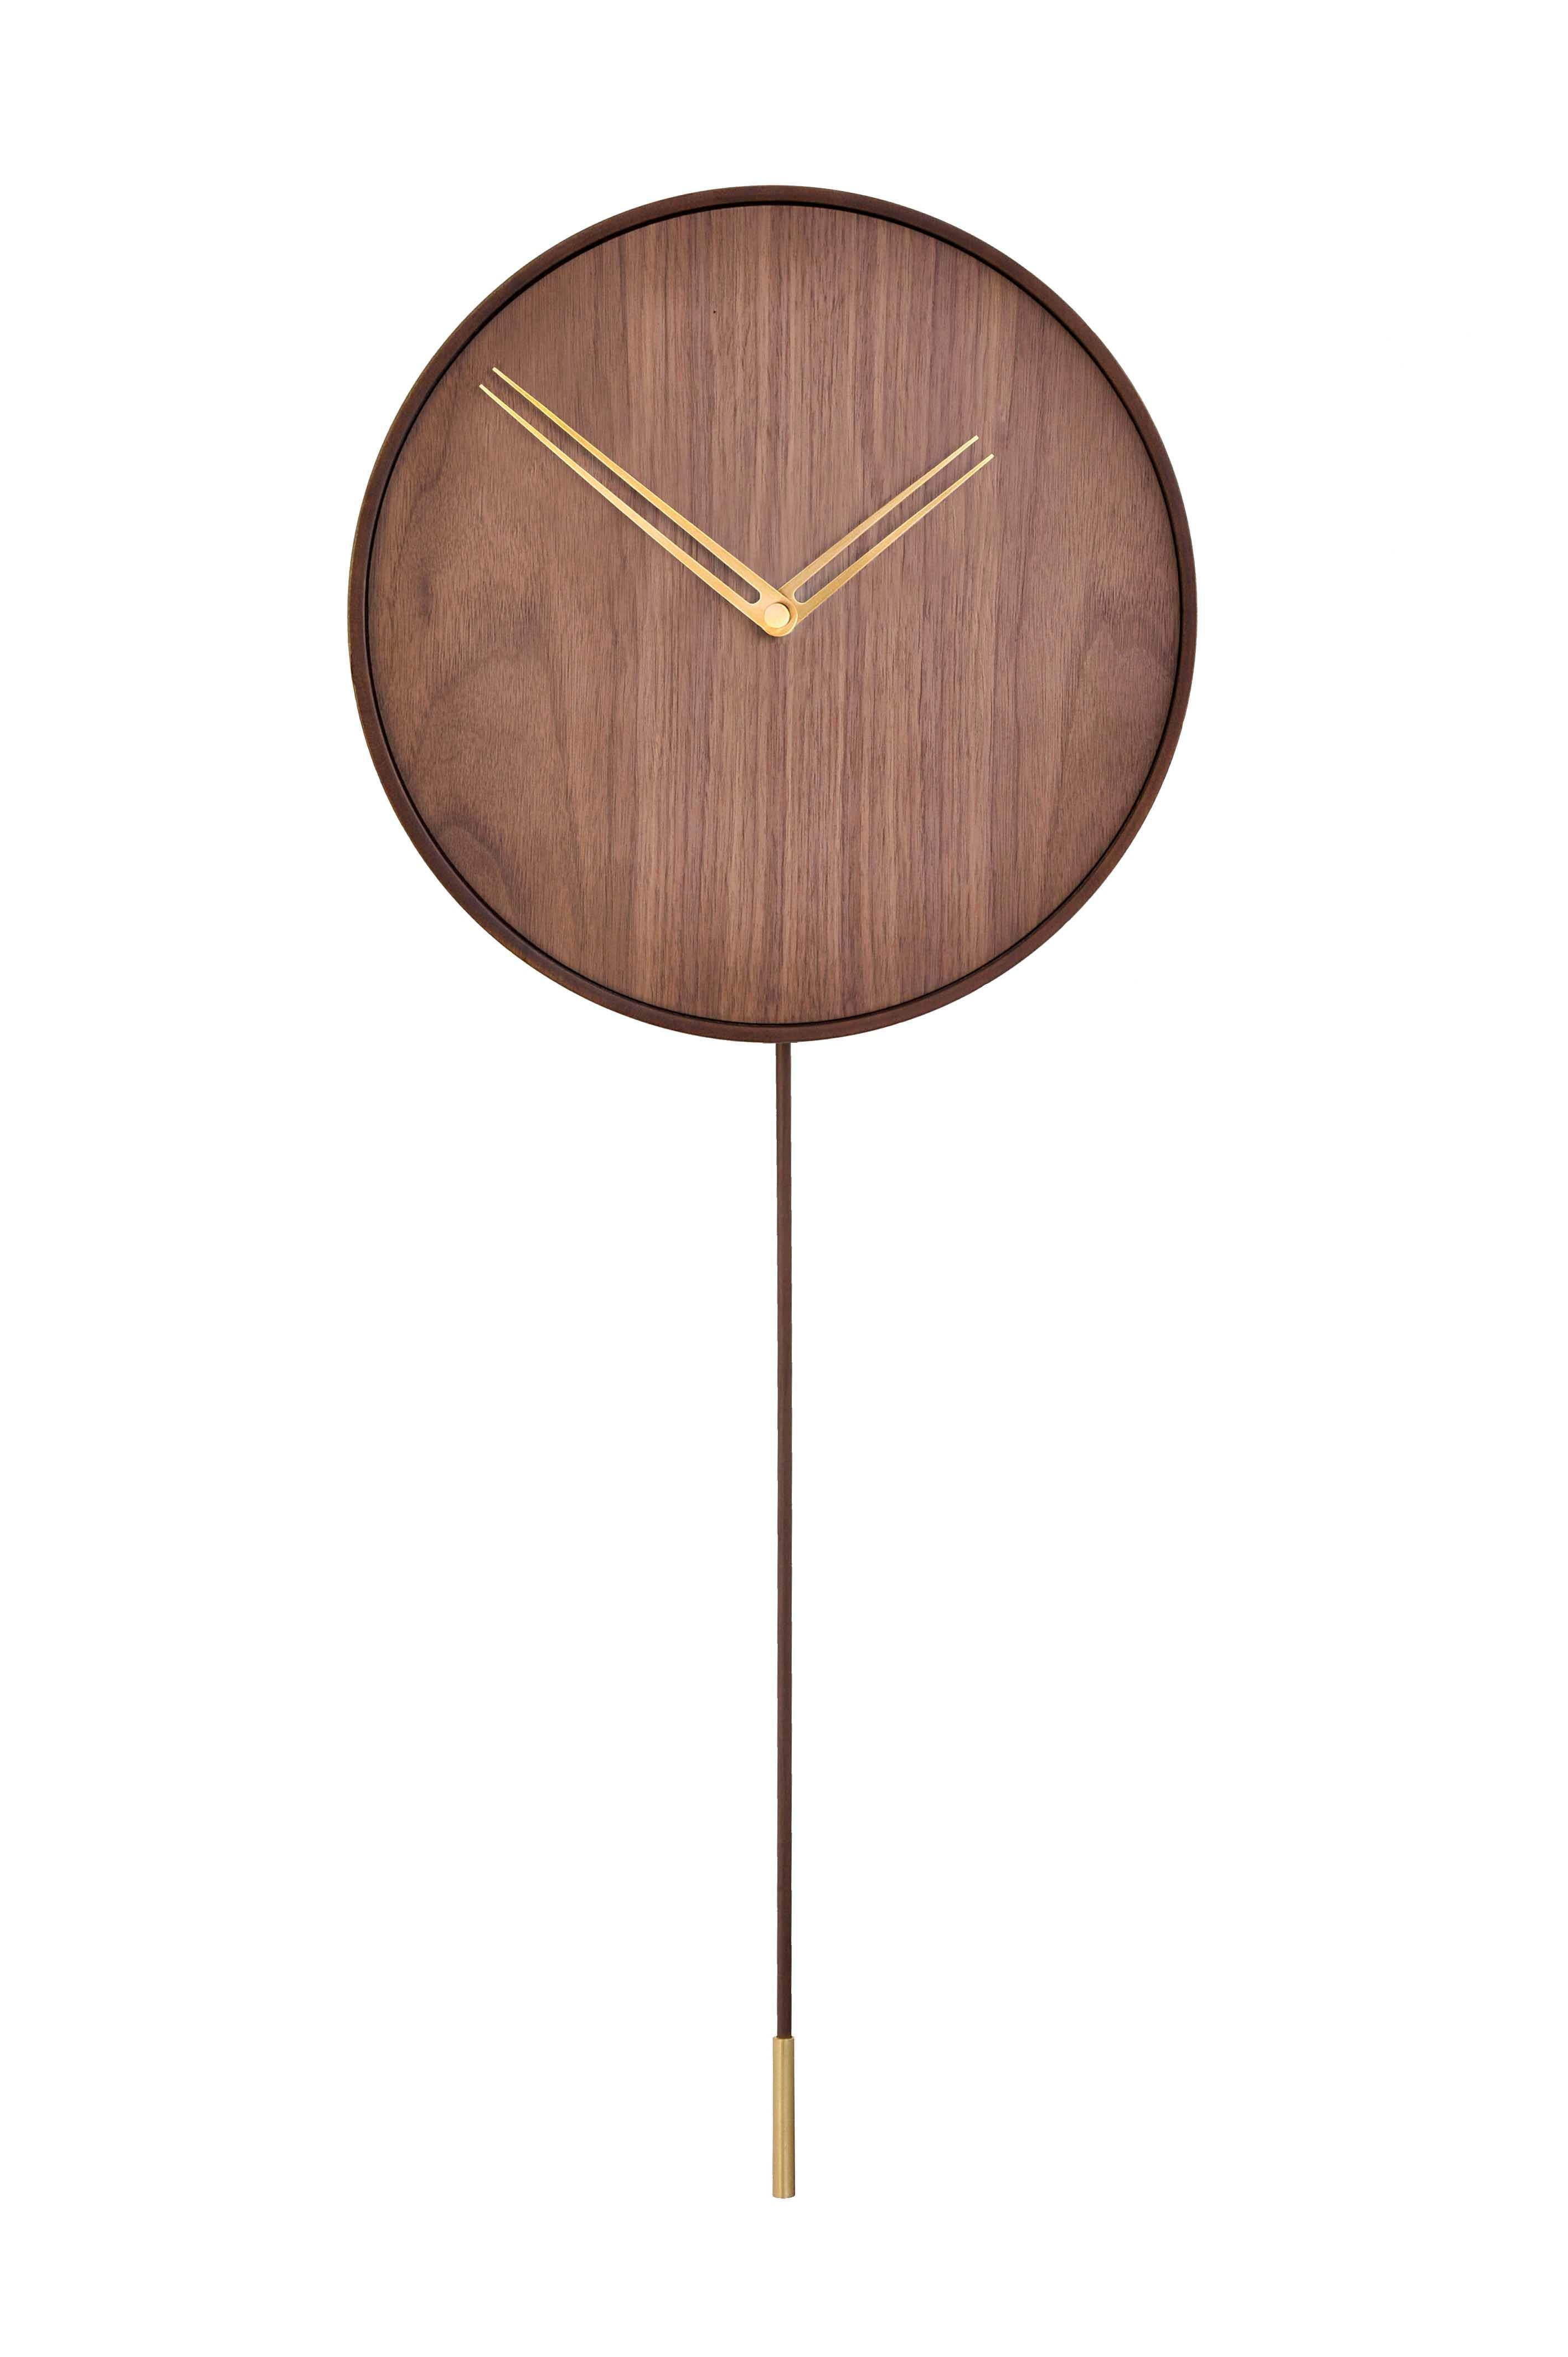 Among the fashionable and avant-garde watches offered by the Nomon brand, is the Swing G Wall Clock. It has an innovative design using dark tones of walnut and Gold needles. It is part of the Gold N collection that stands out for showing the